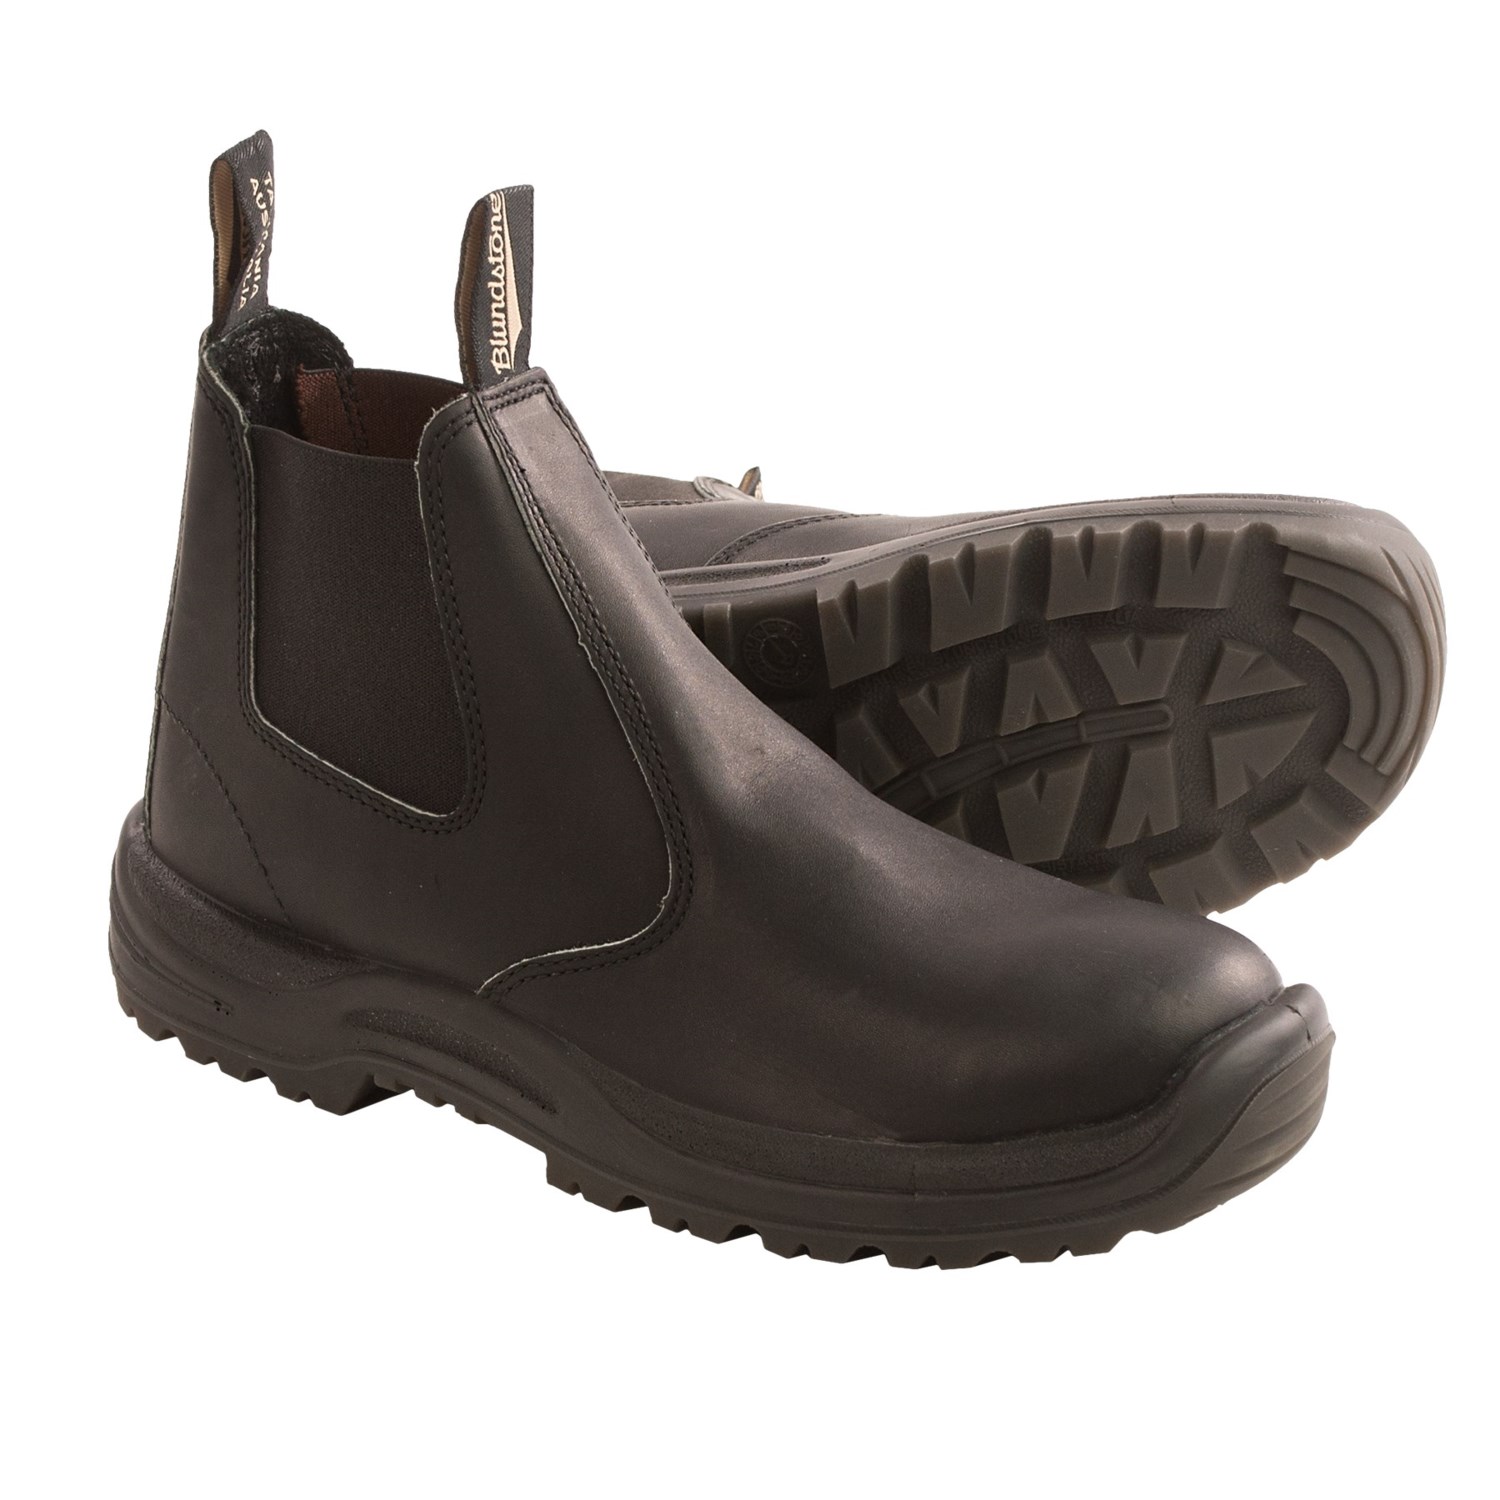 Blundstone Xtreme Safety Boots (For Men and Women) 9256A - Save 44%